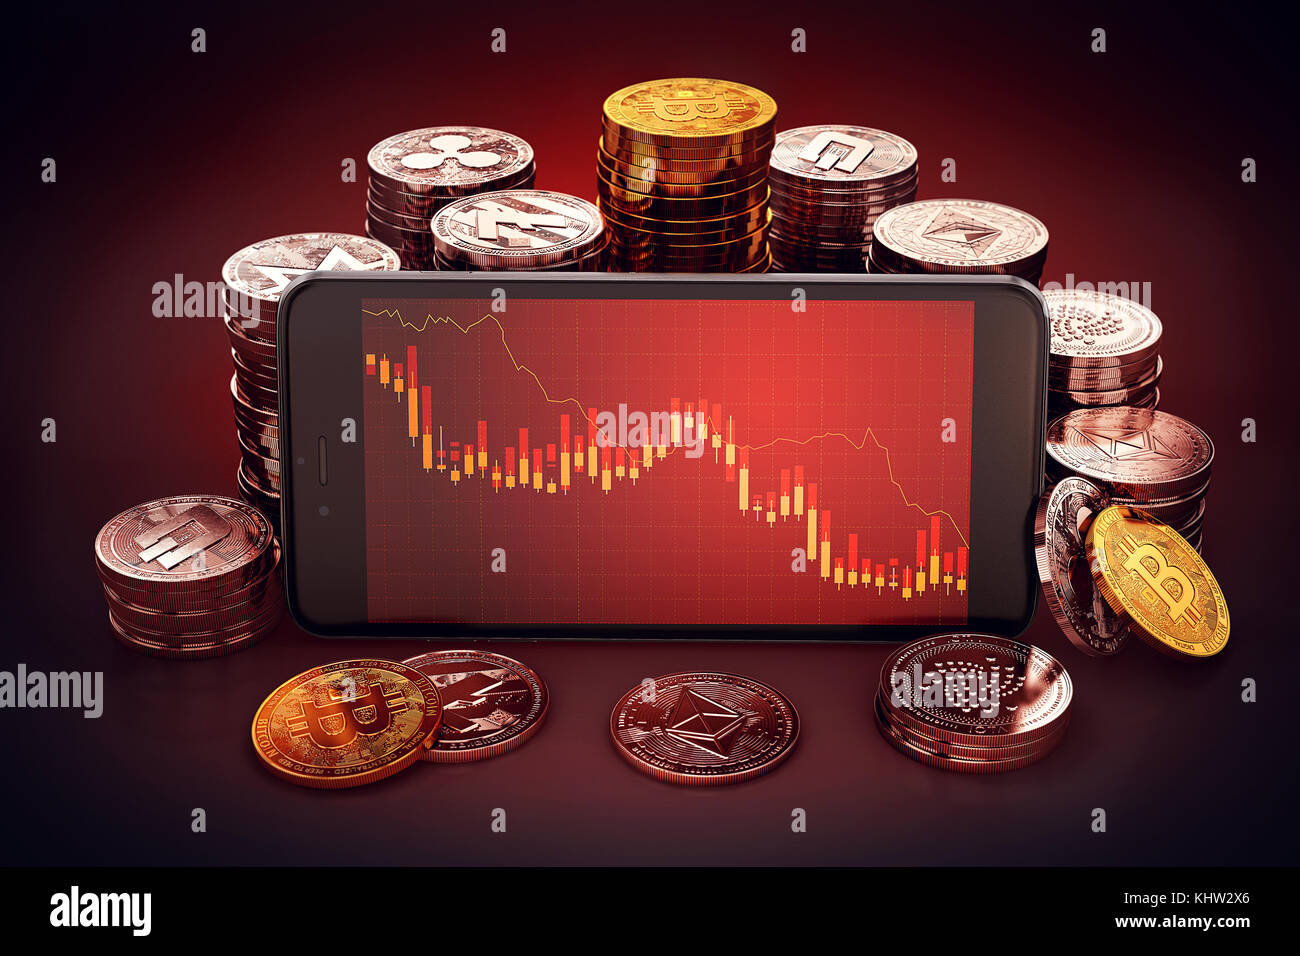 Cryptocurrency decline graph displayed on smartphone screen. Surrounded by different cryptocurrencies piles around. 3D rendering Stock Photo